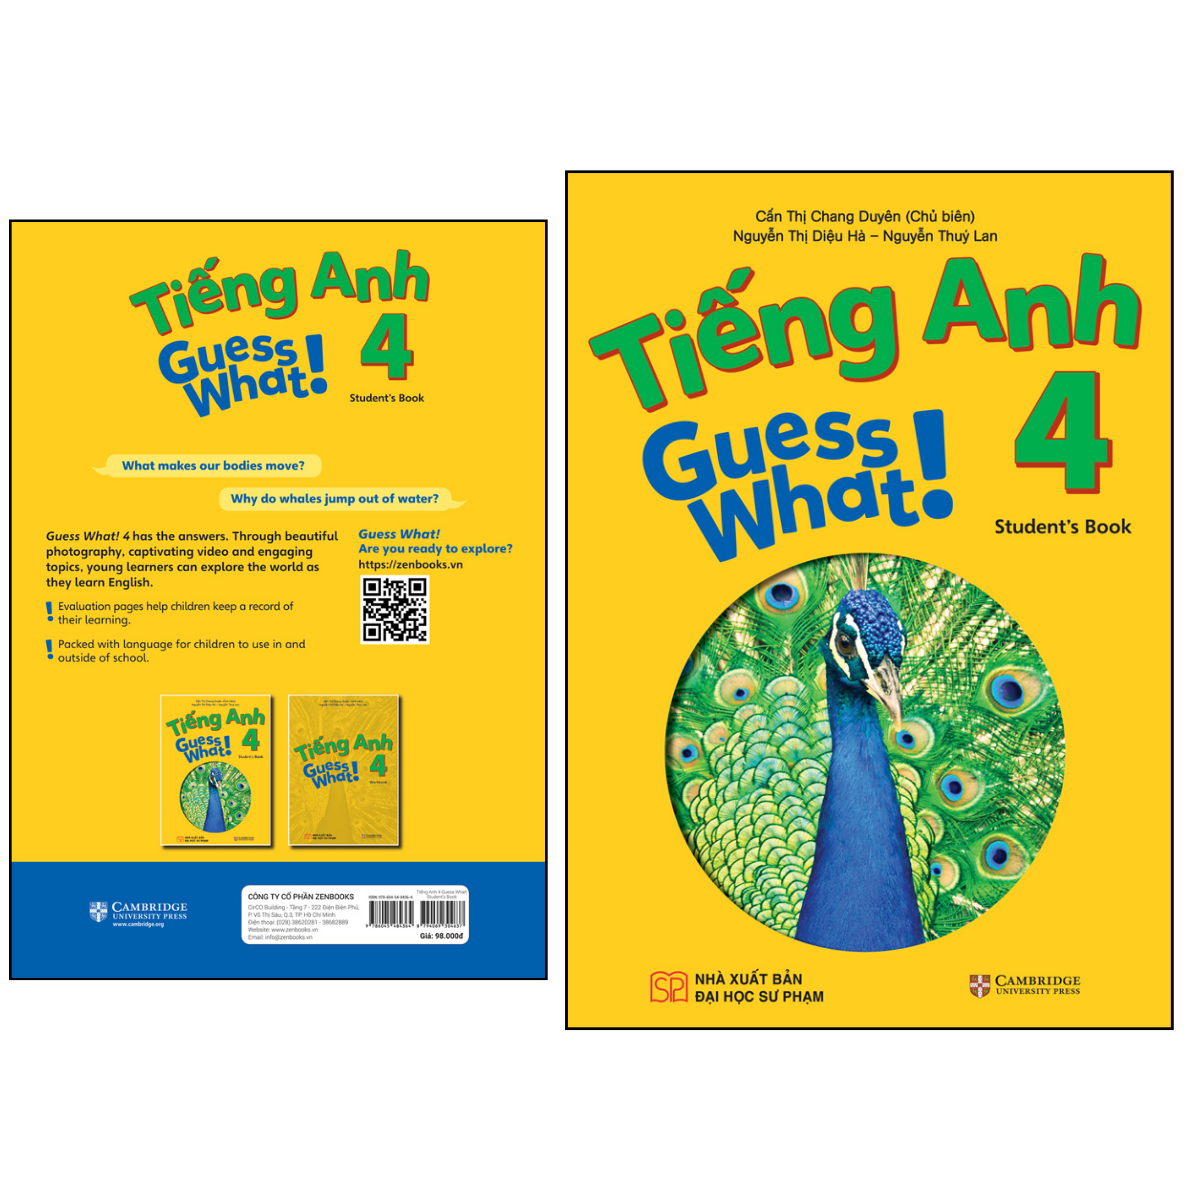 Sách Giáo Khoa Tiếng Anh 4 Guess What ! (Student's Book)